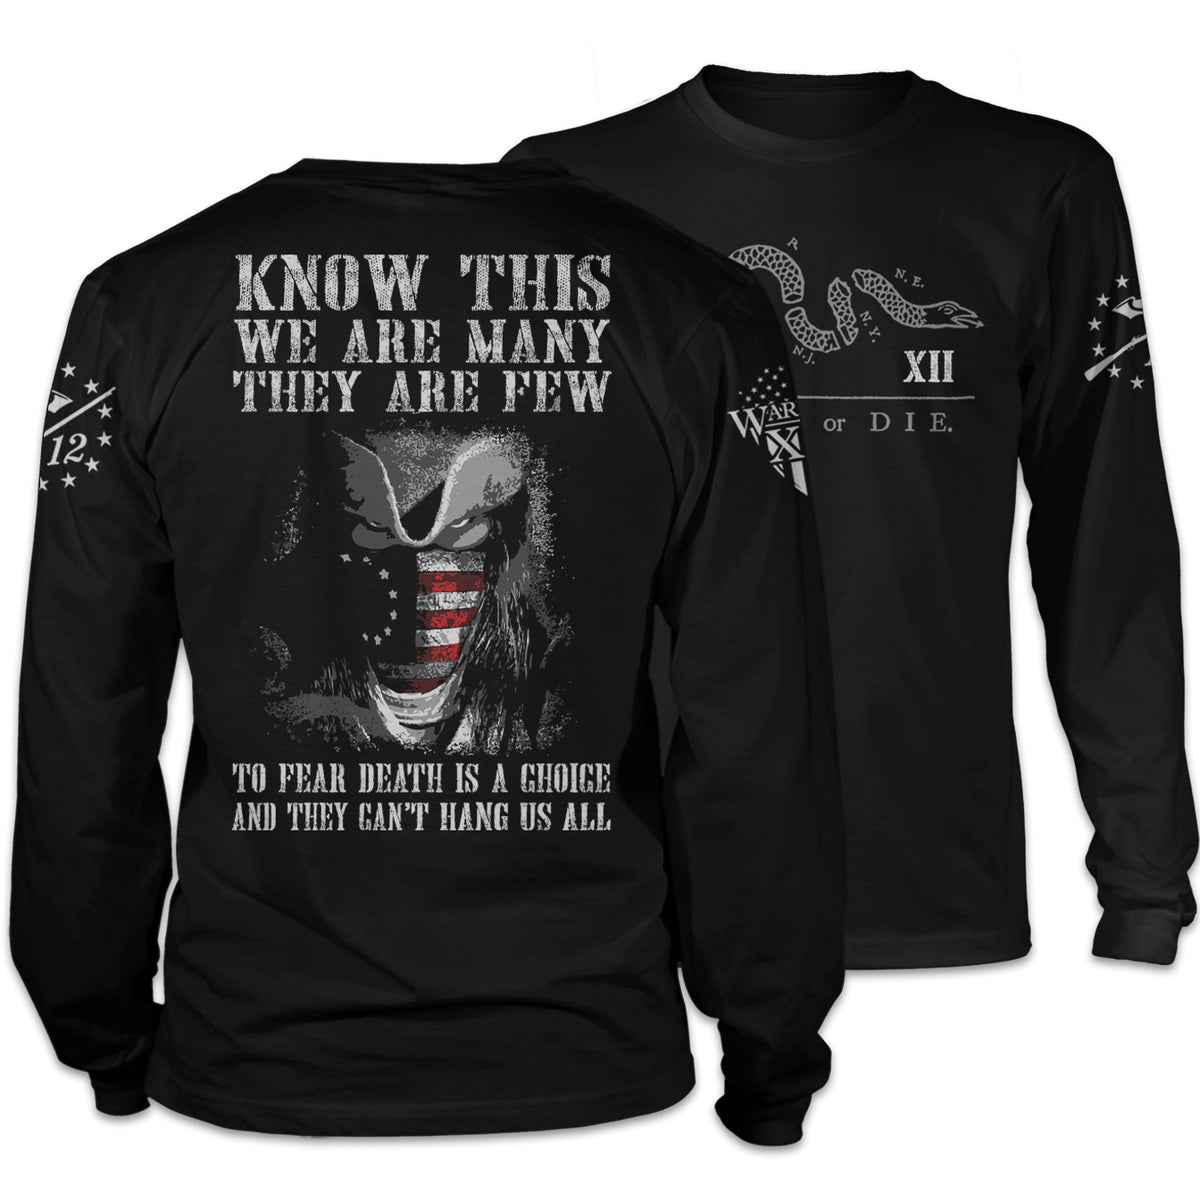 Front & back black long sleeve shirt with the words, "Know This, We Are Many They Are Few. To Fear Death Is A Choice, And They Can't Hang Us All" on the back and the words "Join Or Die" on the front.